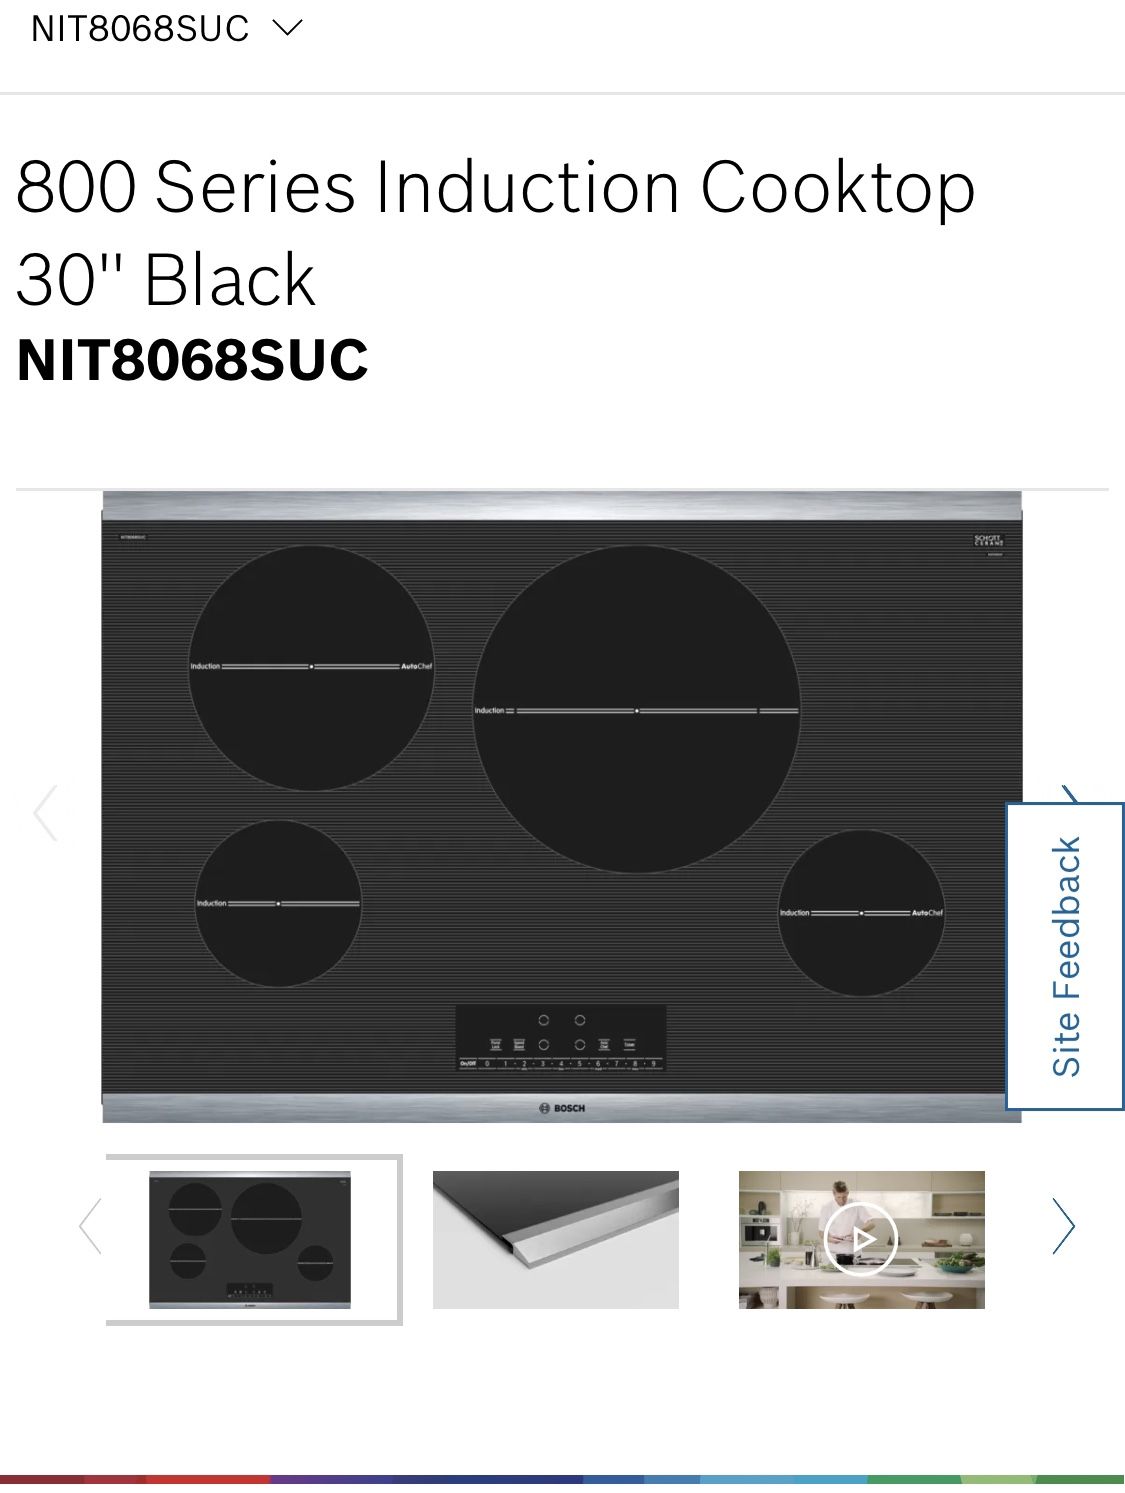 Bosch Induction cooktop 800 series